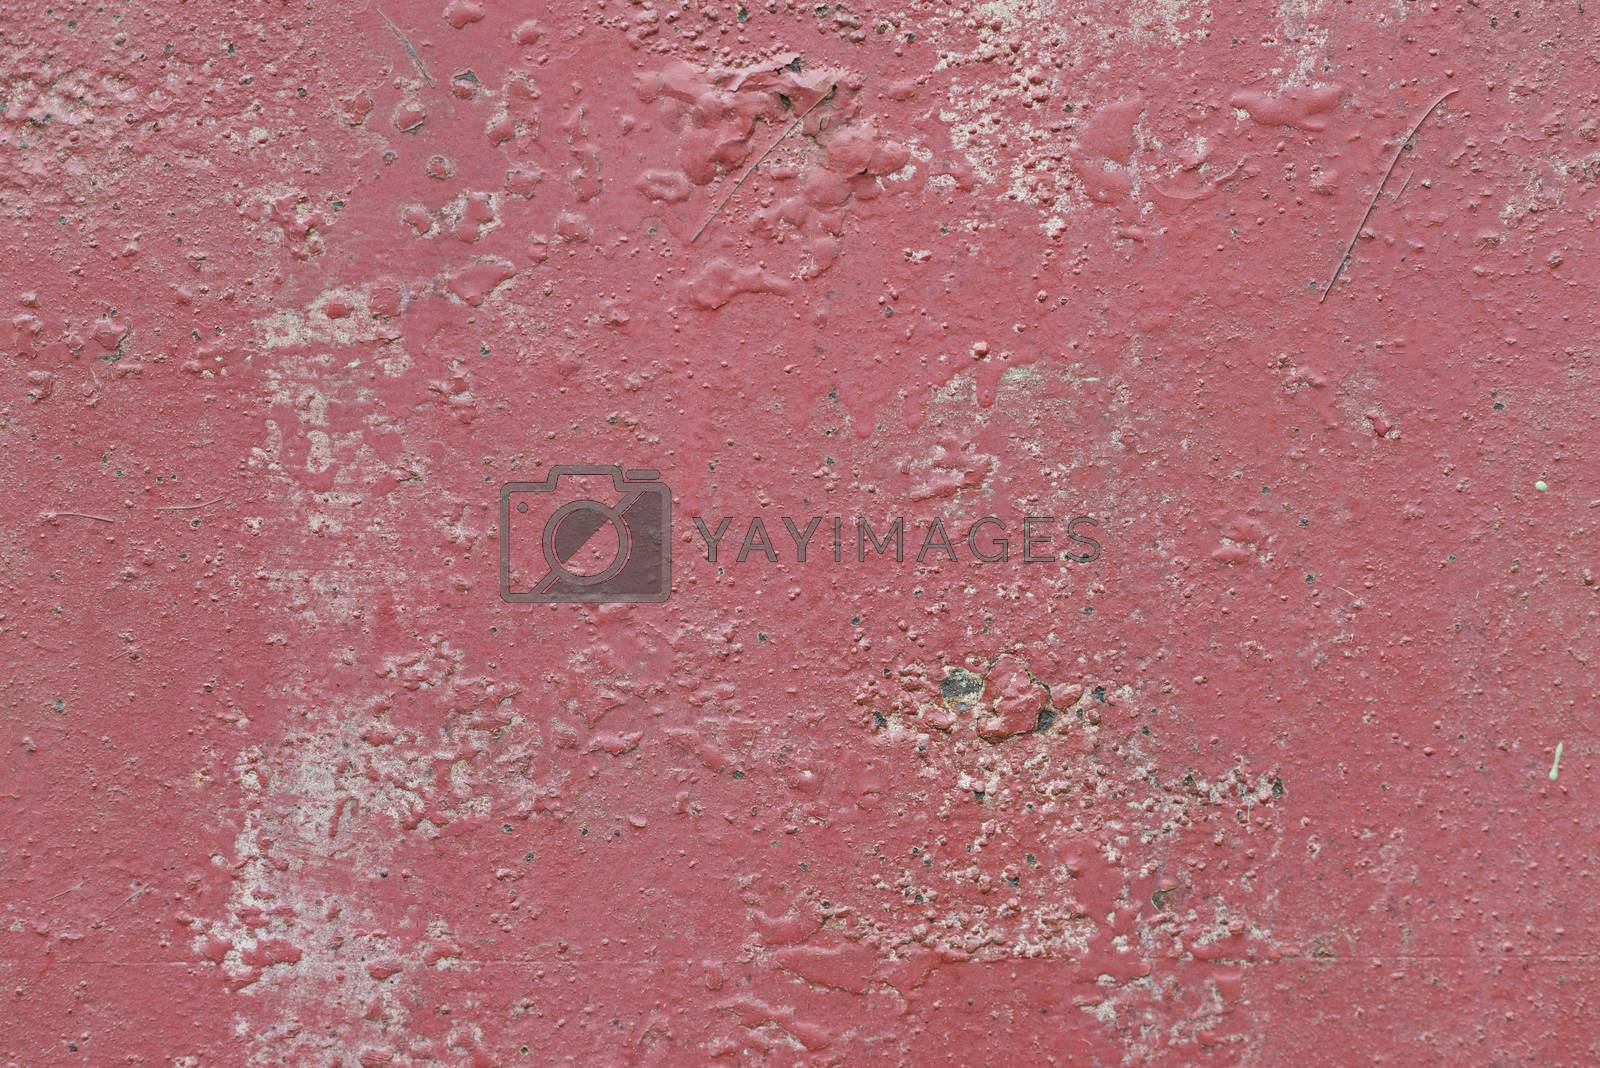 Royalty free image of Rusty red metal plate as a background
 by Tofotografie